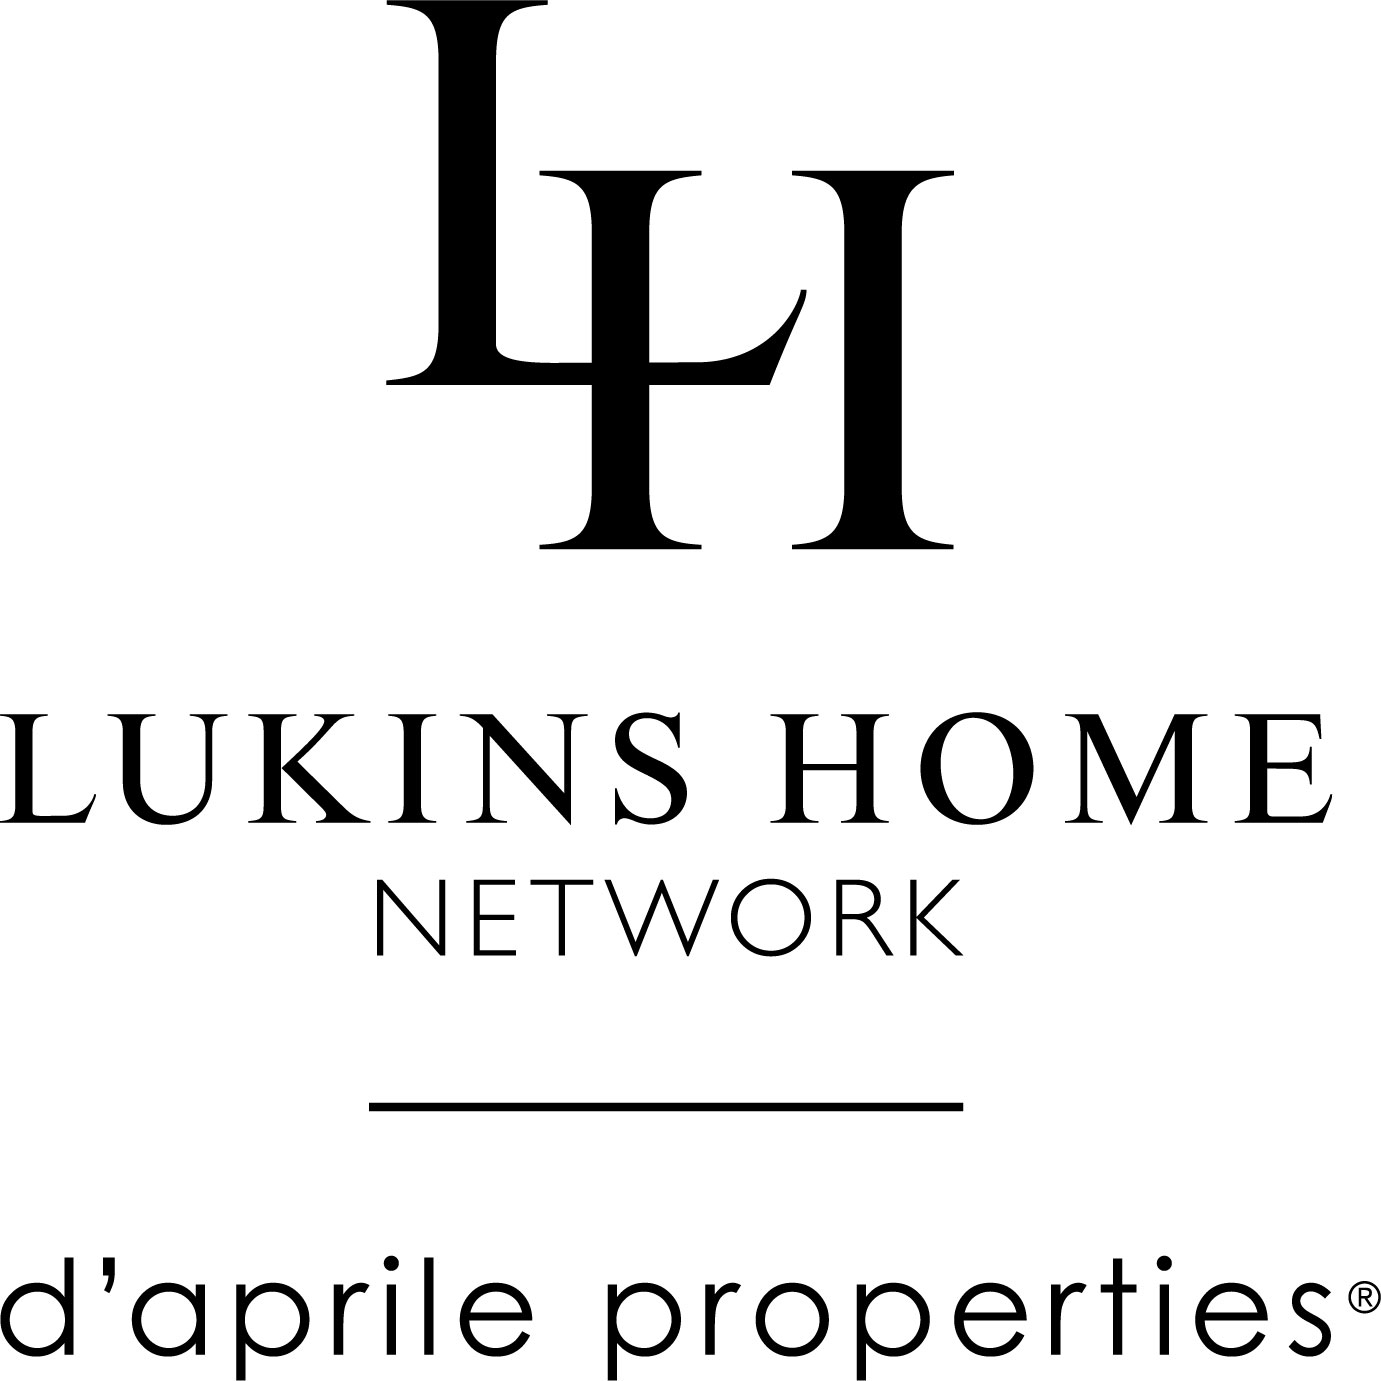 Lukins Home Network